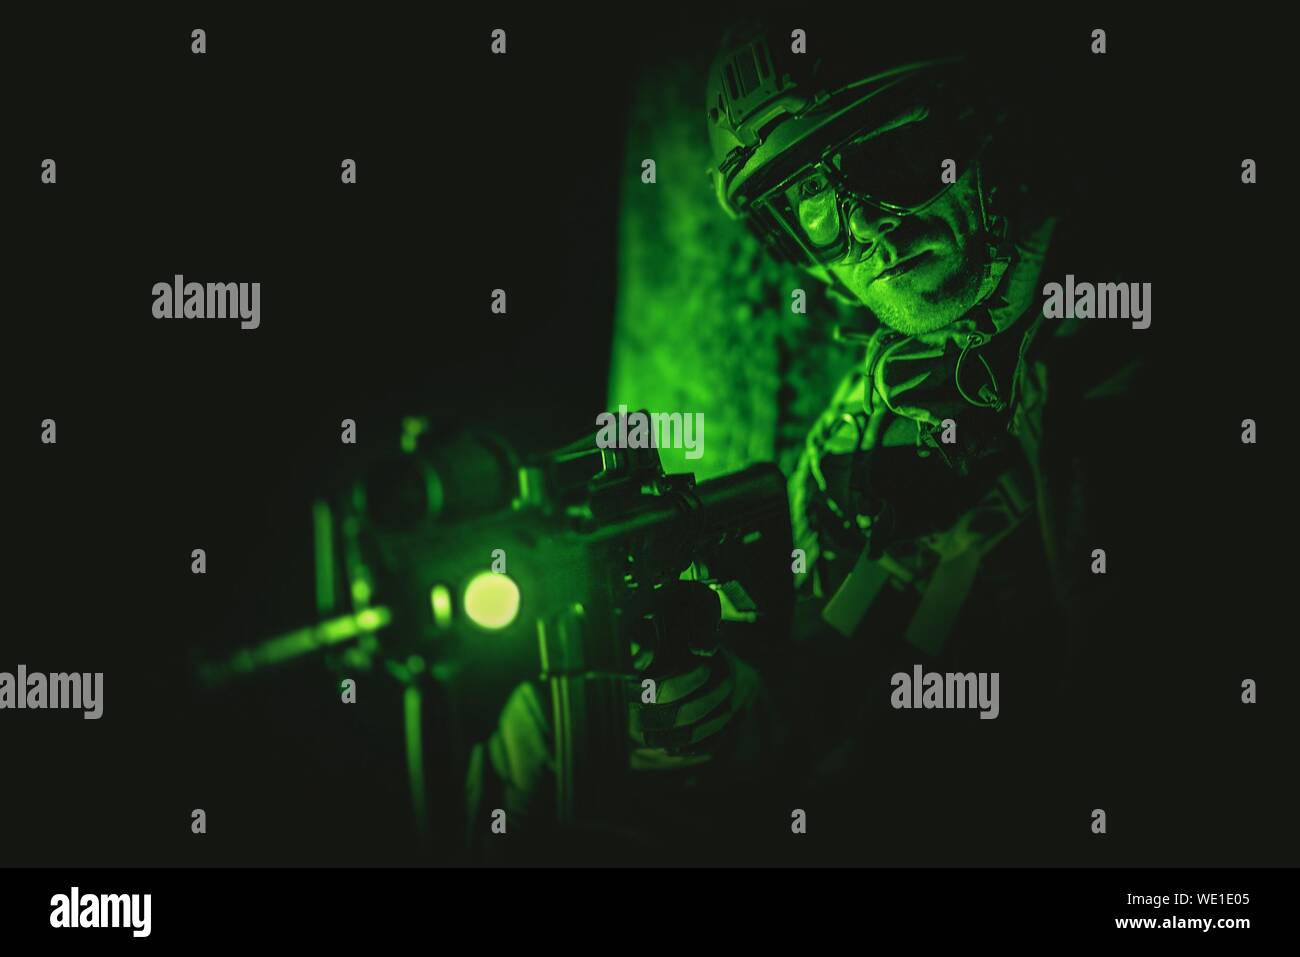 Army Soldier With Sniper Gun At Night Stock Photo